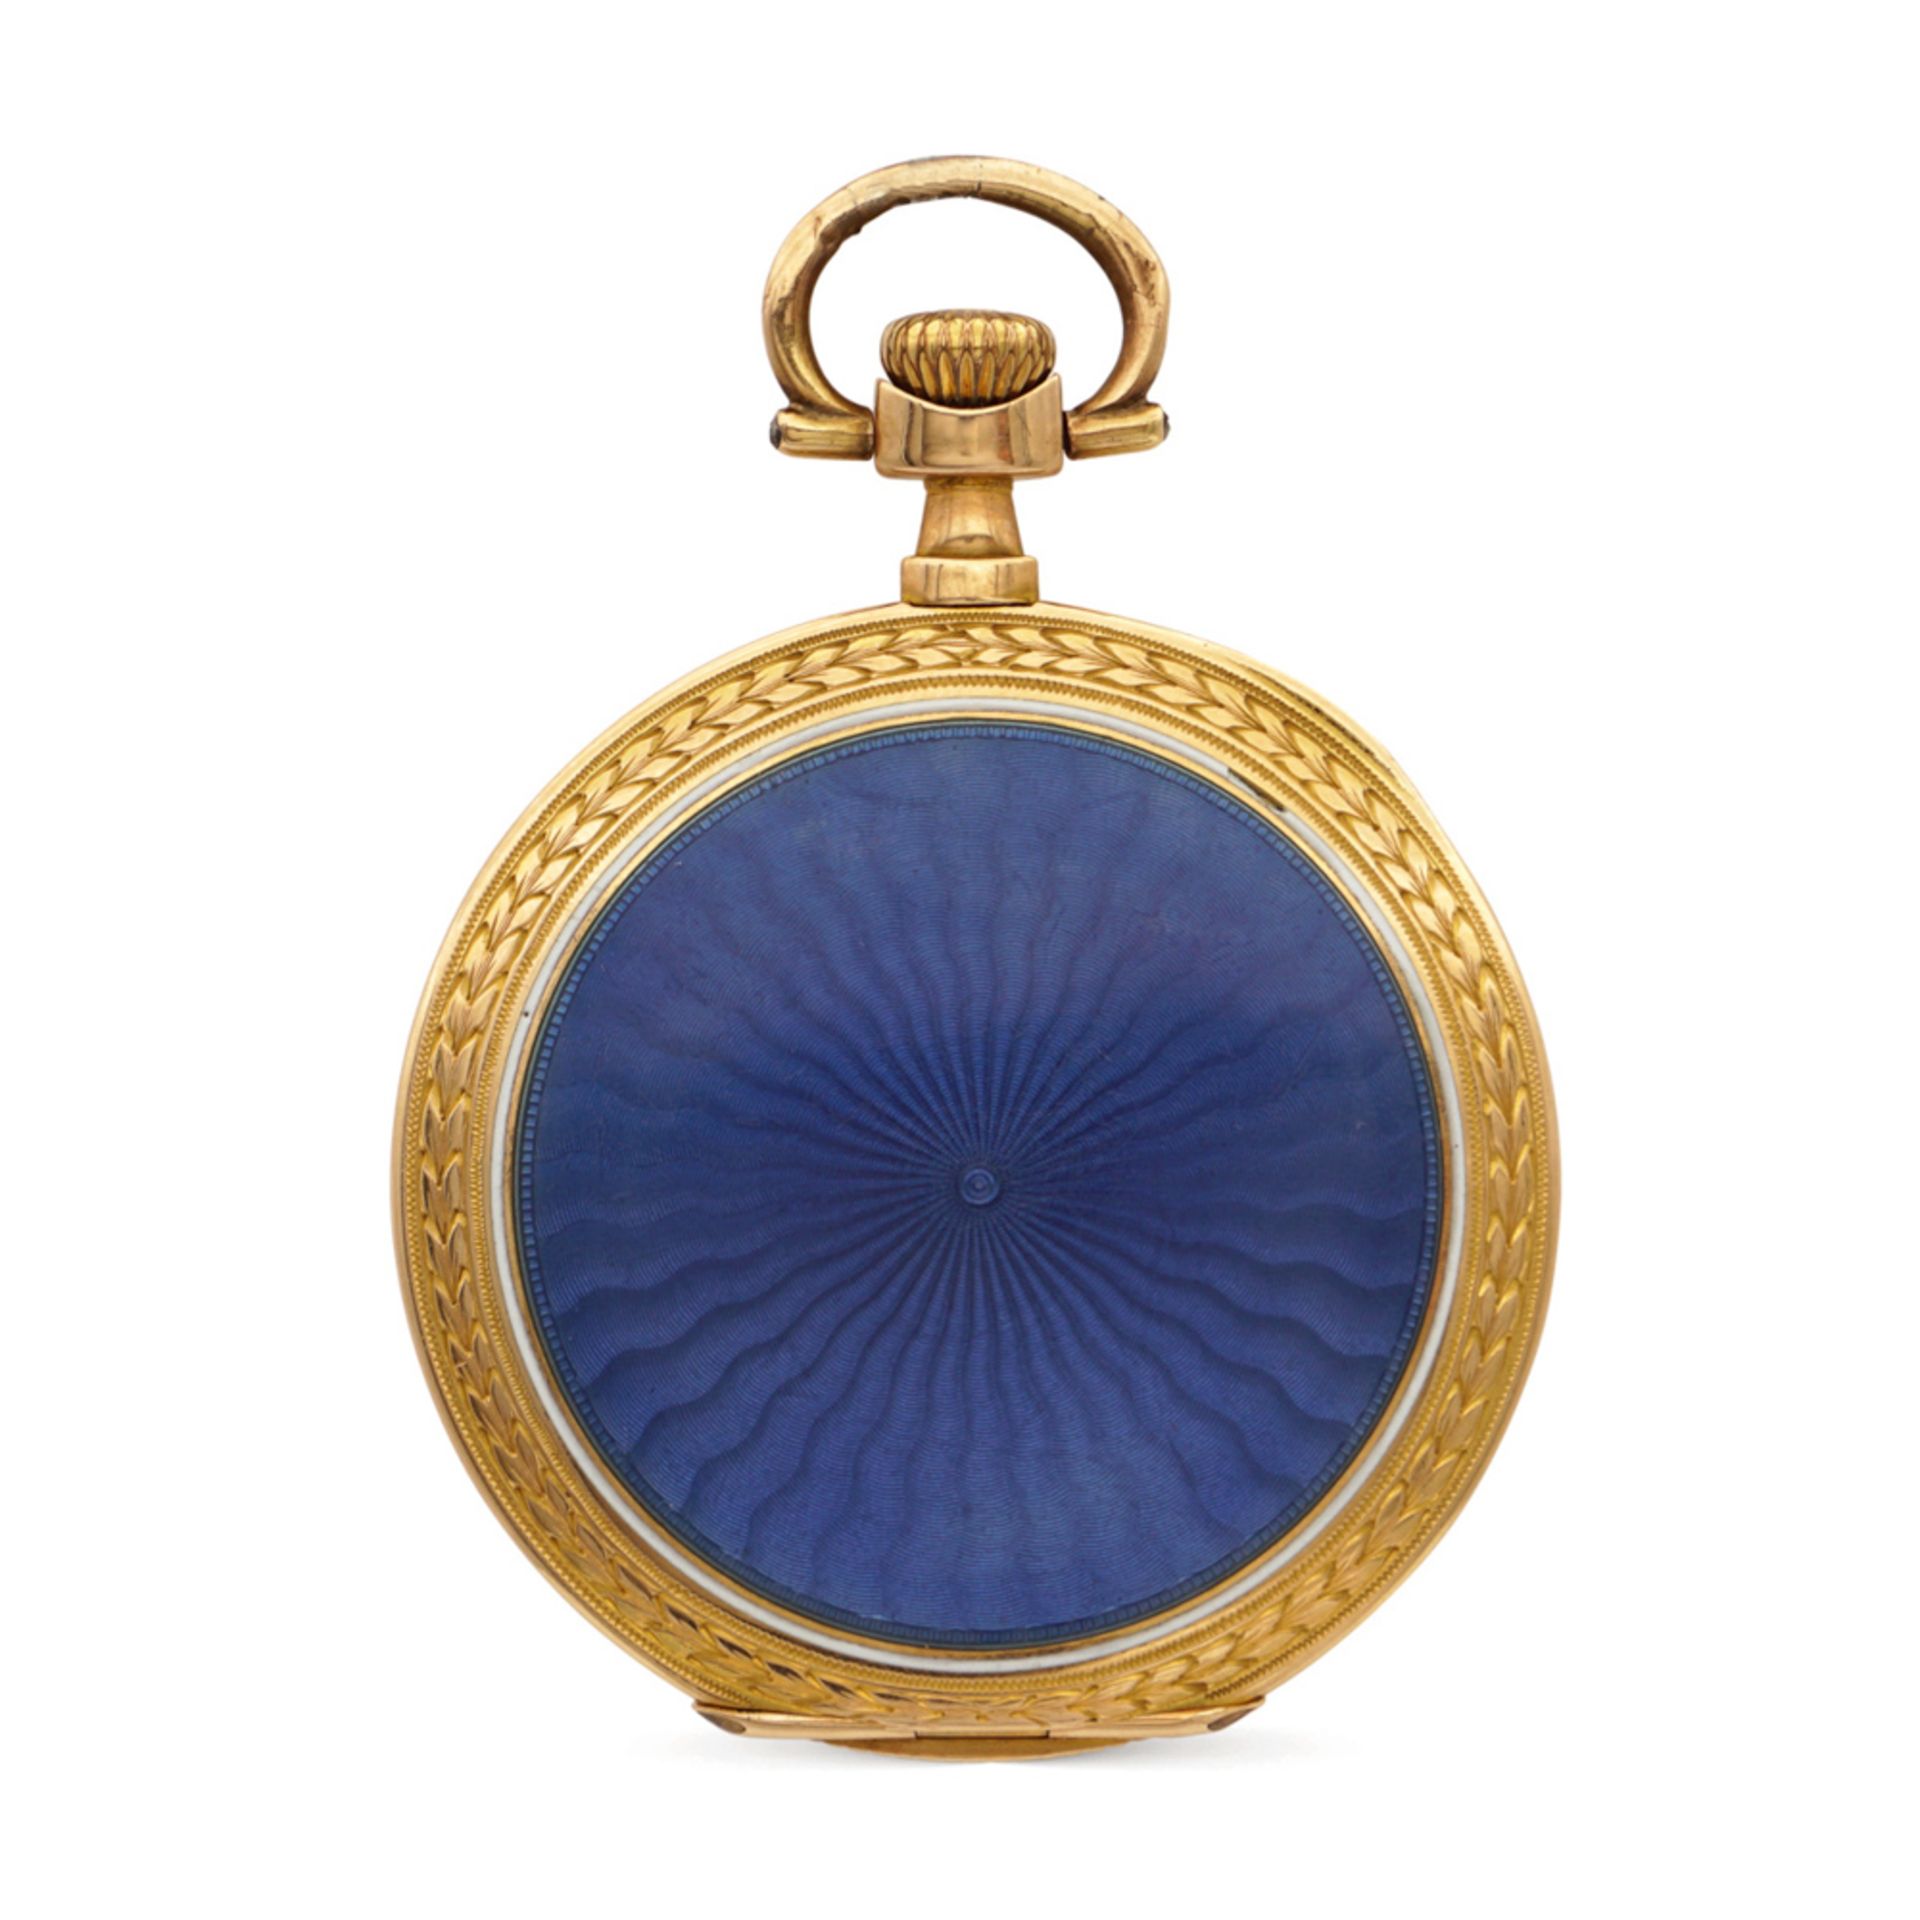 Tavannes Watch, pocket watch early 20th century weight 55,5 gr. - Image 2 of 4